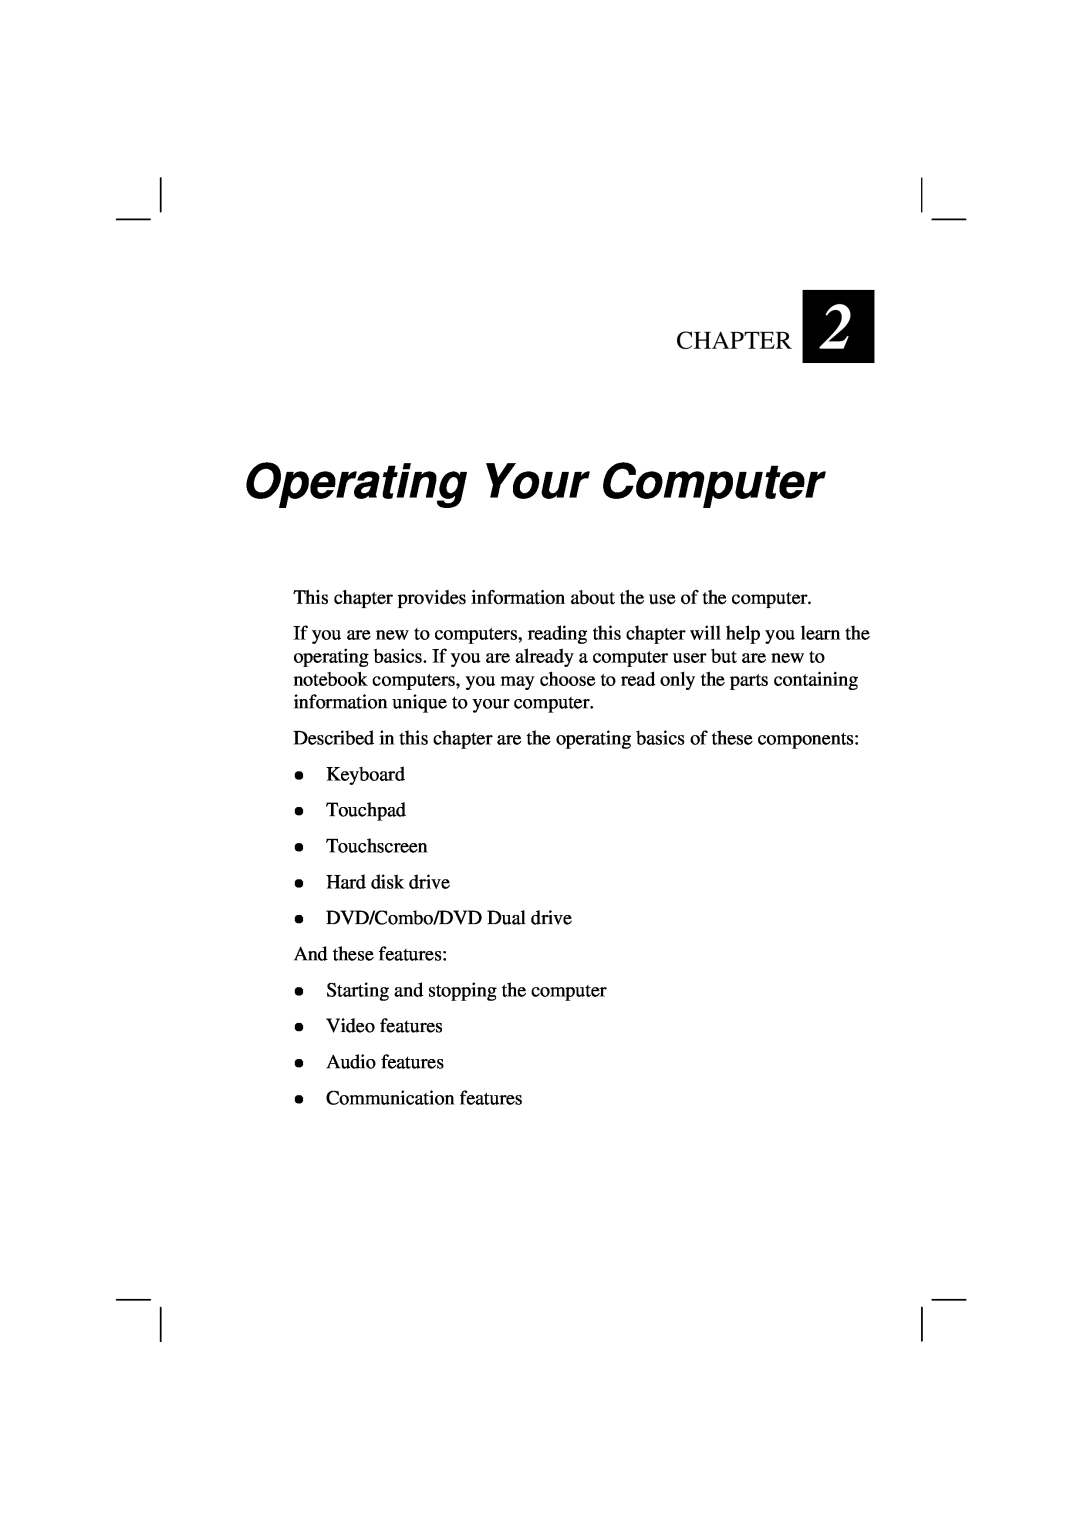 Casio HK1223 owner manual Operating Your Computer, Chapter 